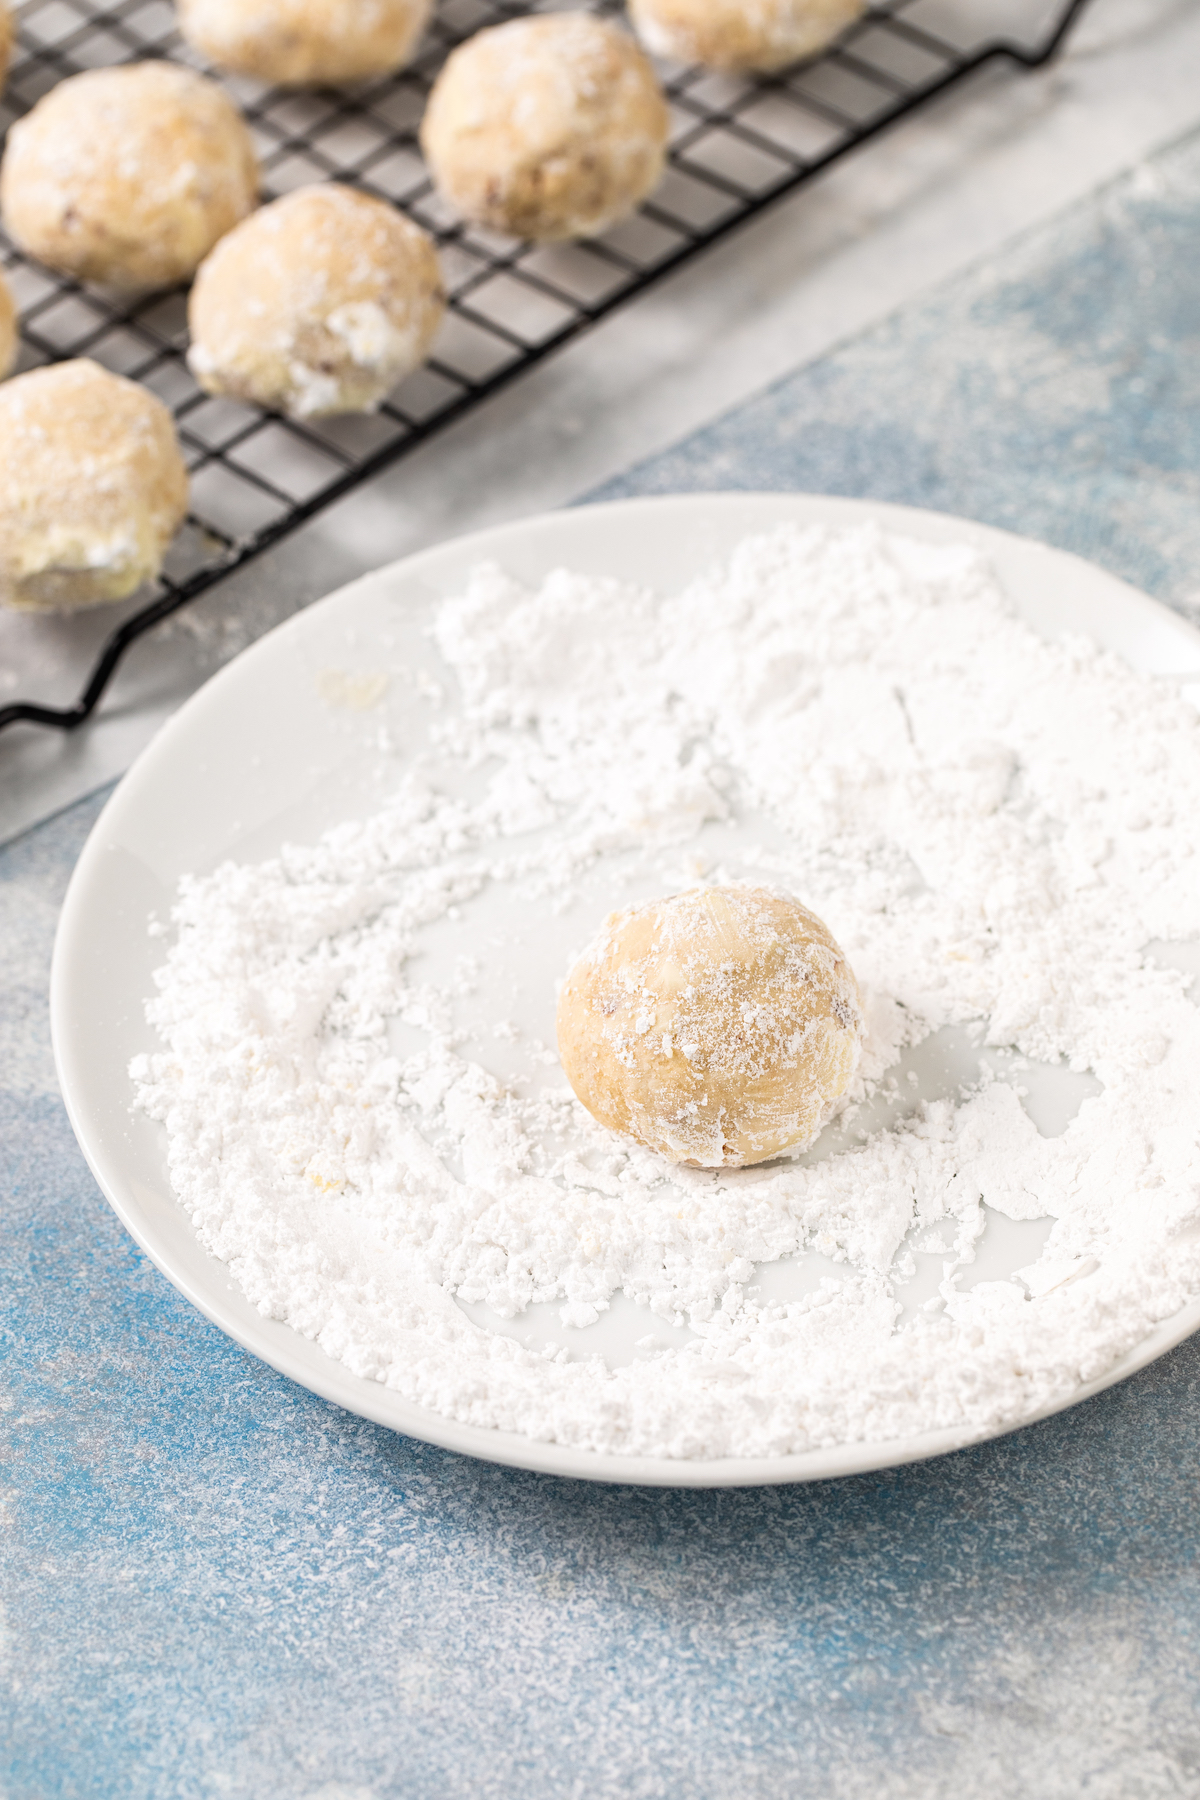 A cookie being coated in powdered sugar.